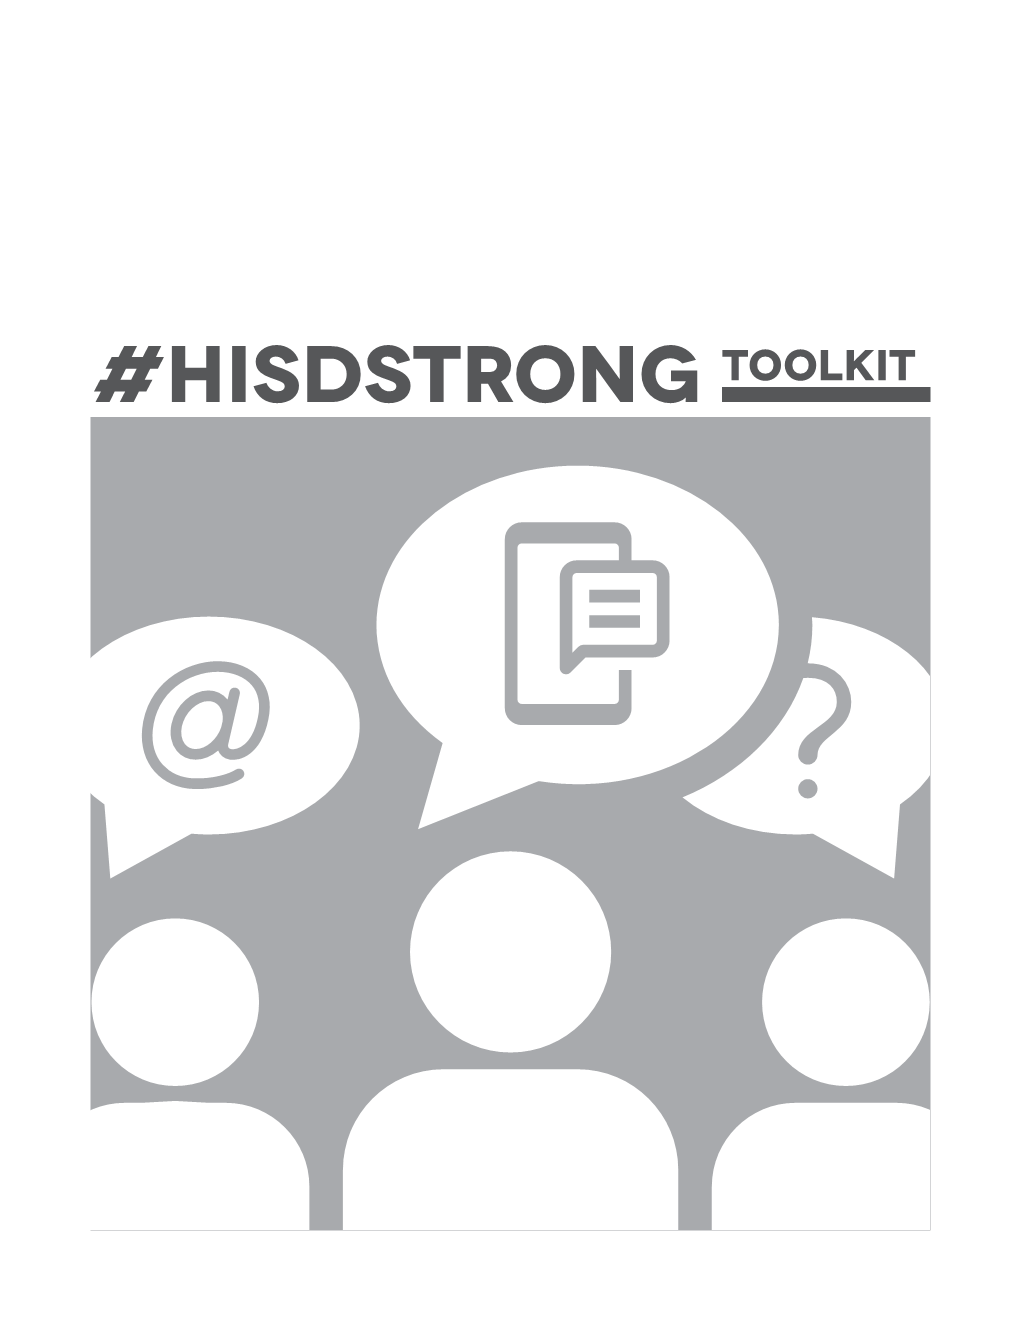 Hisdstrong Toolkit